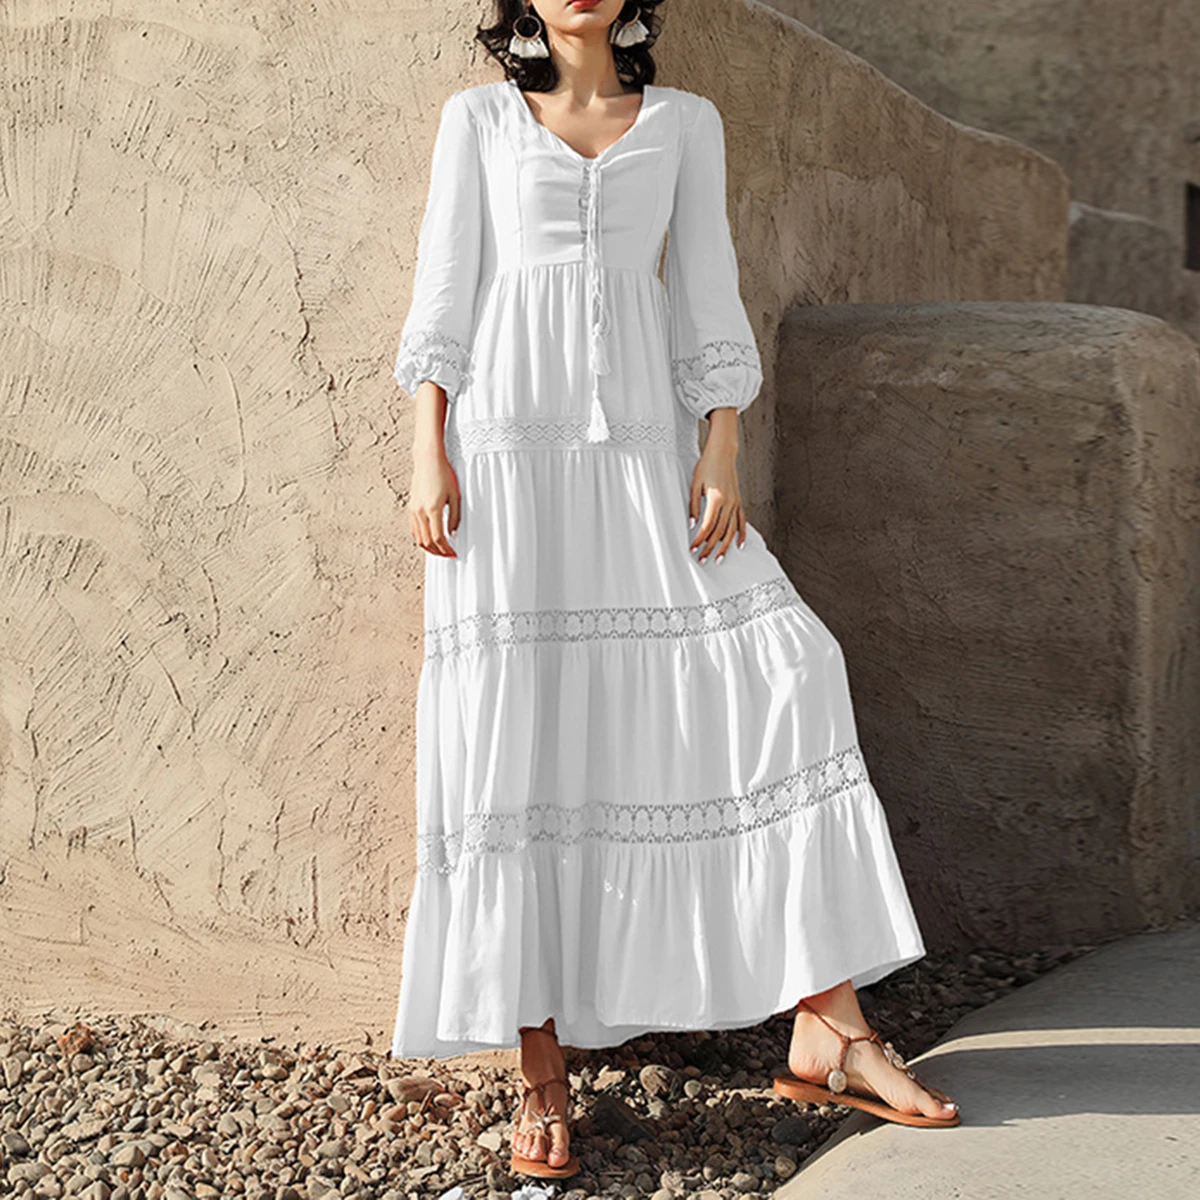 Women Casual Boho Beach Dresses Solid Lace Patchwork Holiday Split Maxi Dress Wintialy Women Dress 